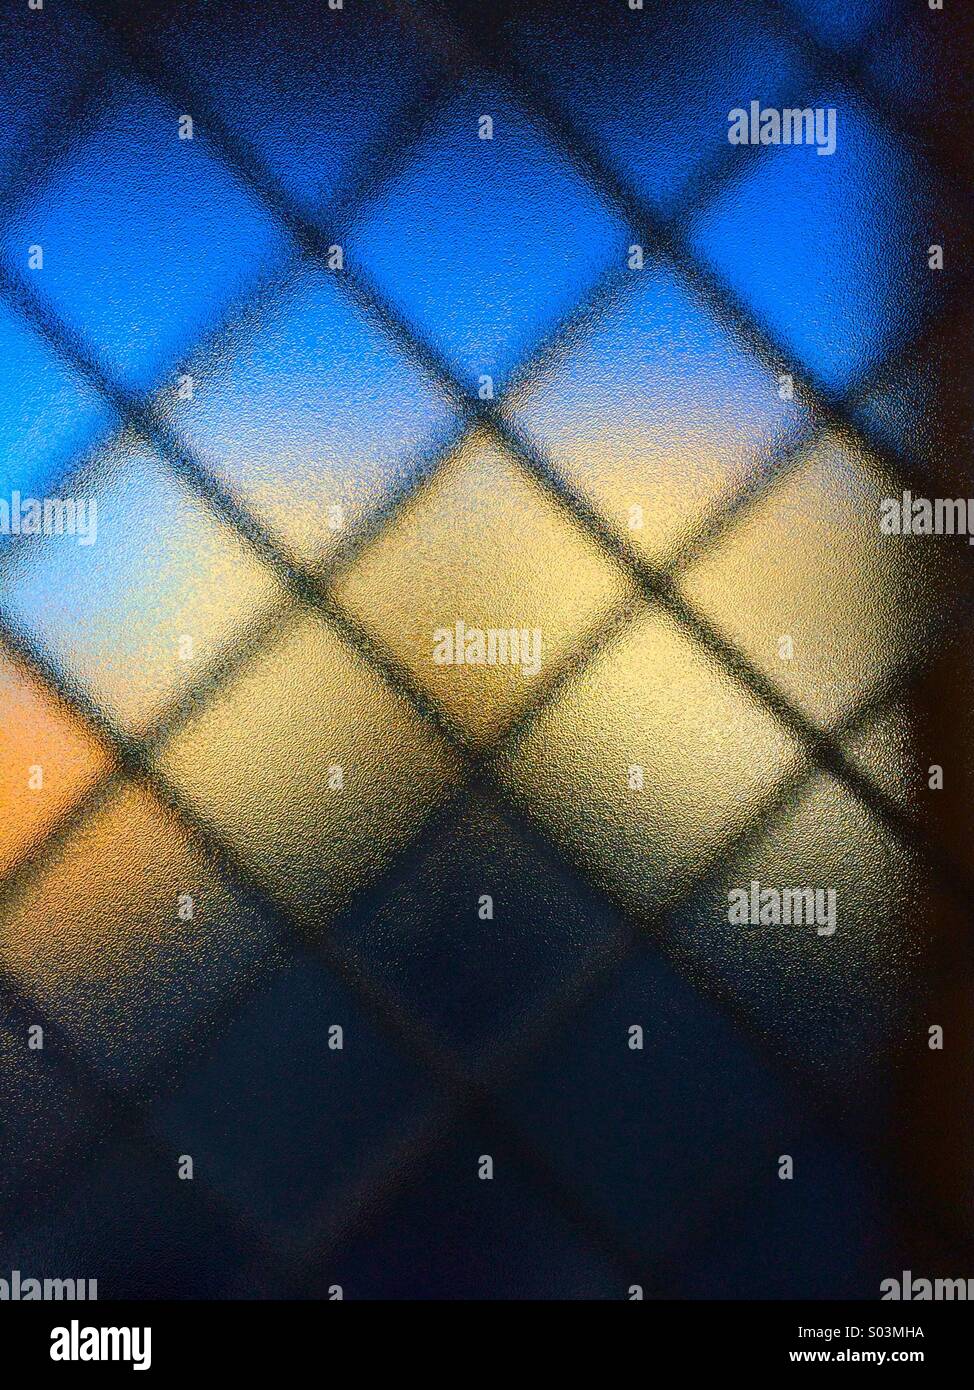 Window with frosted glass and wire pattern. Stock Photo